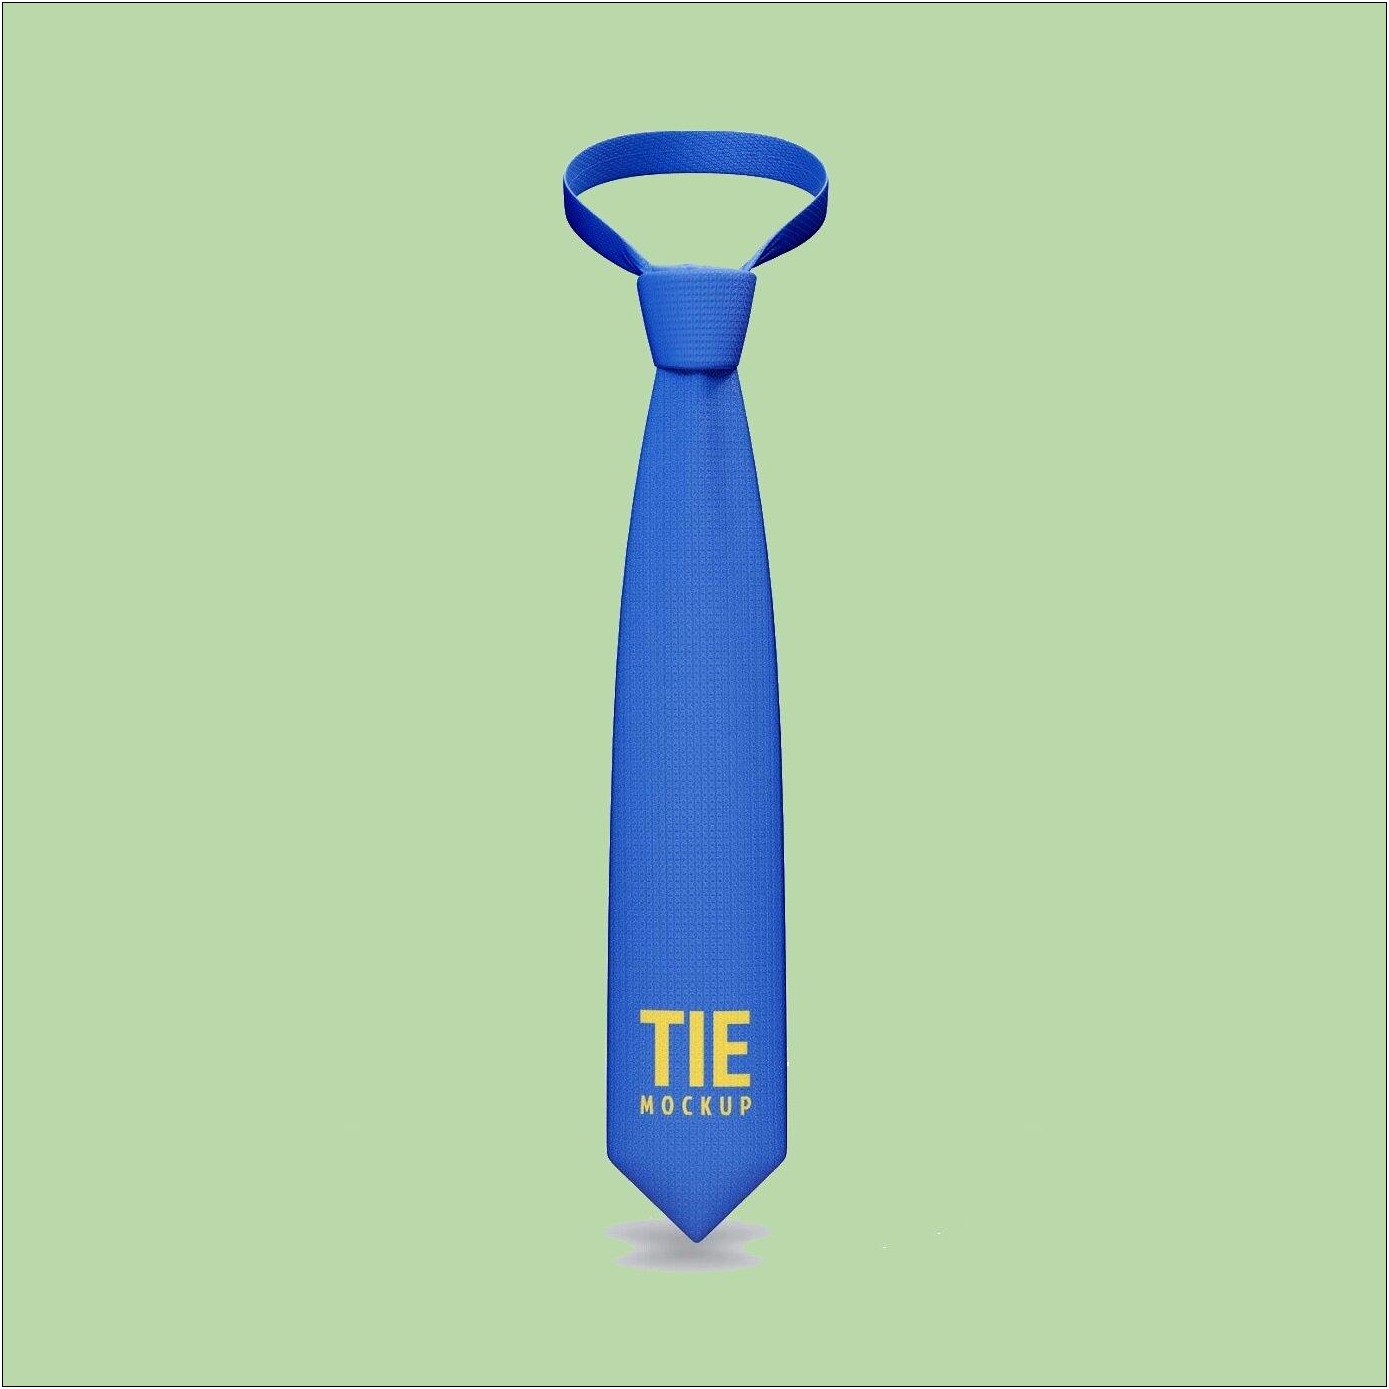 Coat And Tie Template Psd Free Download